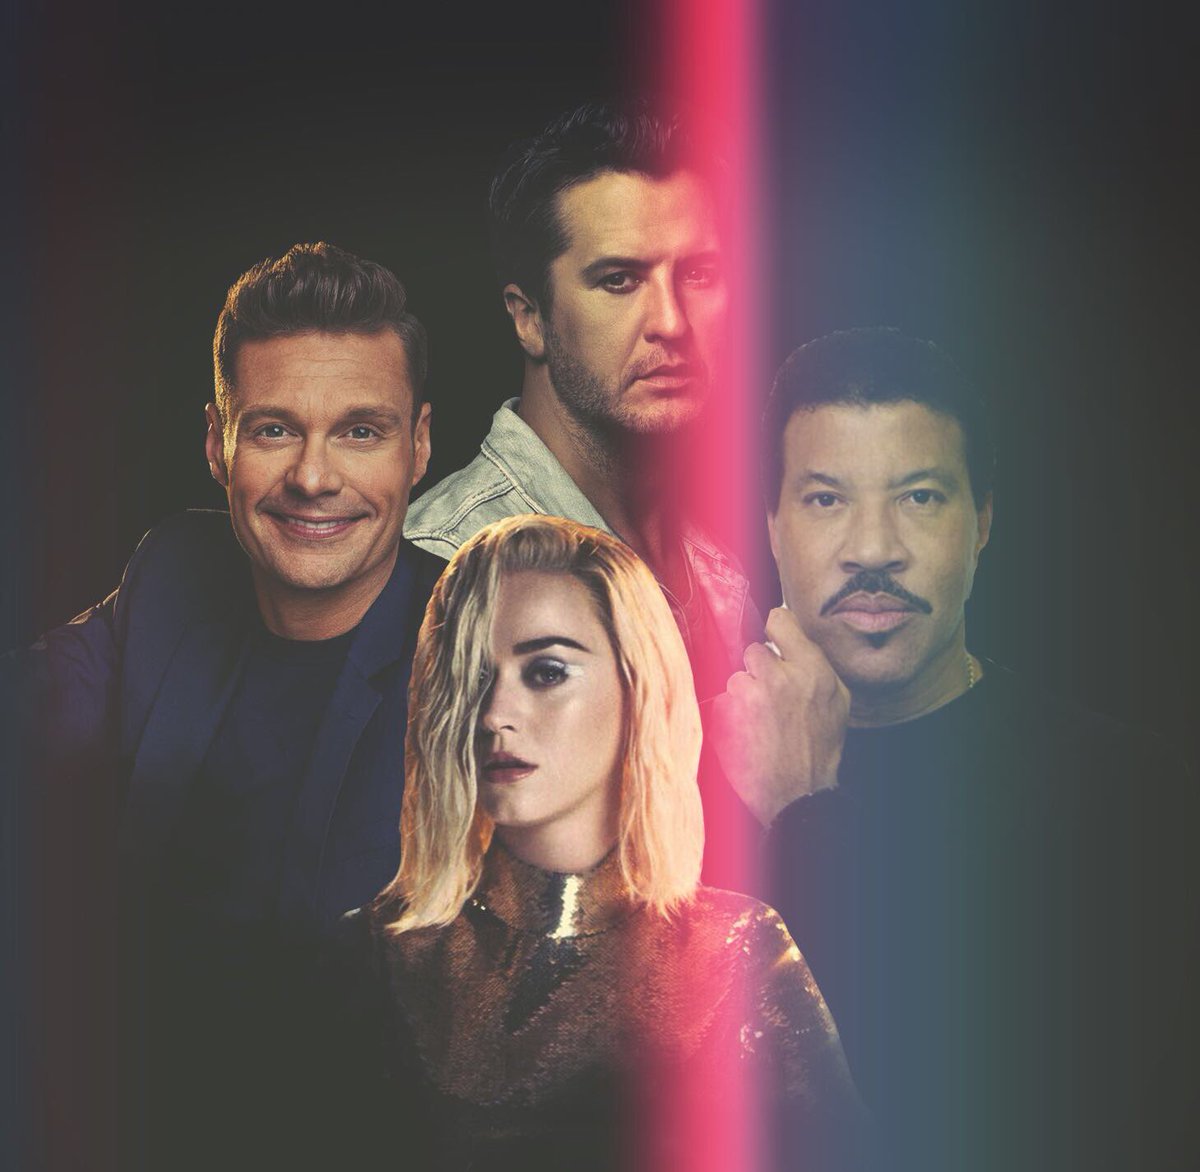 ☑ your calendars ???????? let's find an IDOL❗@AmericanIdol will premiere Sunday, March 11 on ABC. #AmericanIdol https://t.co/adKVabe5EE